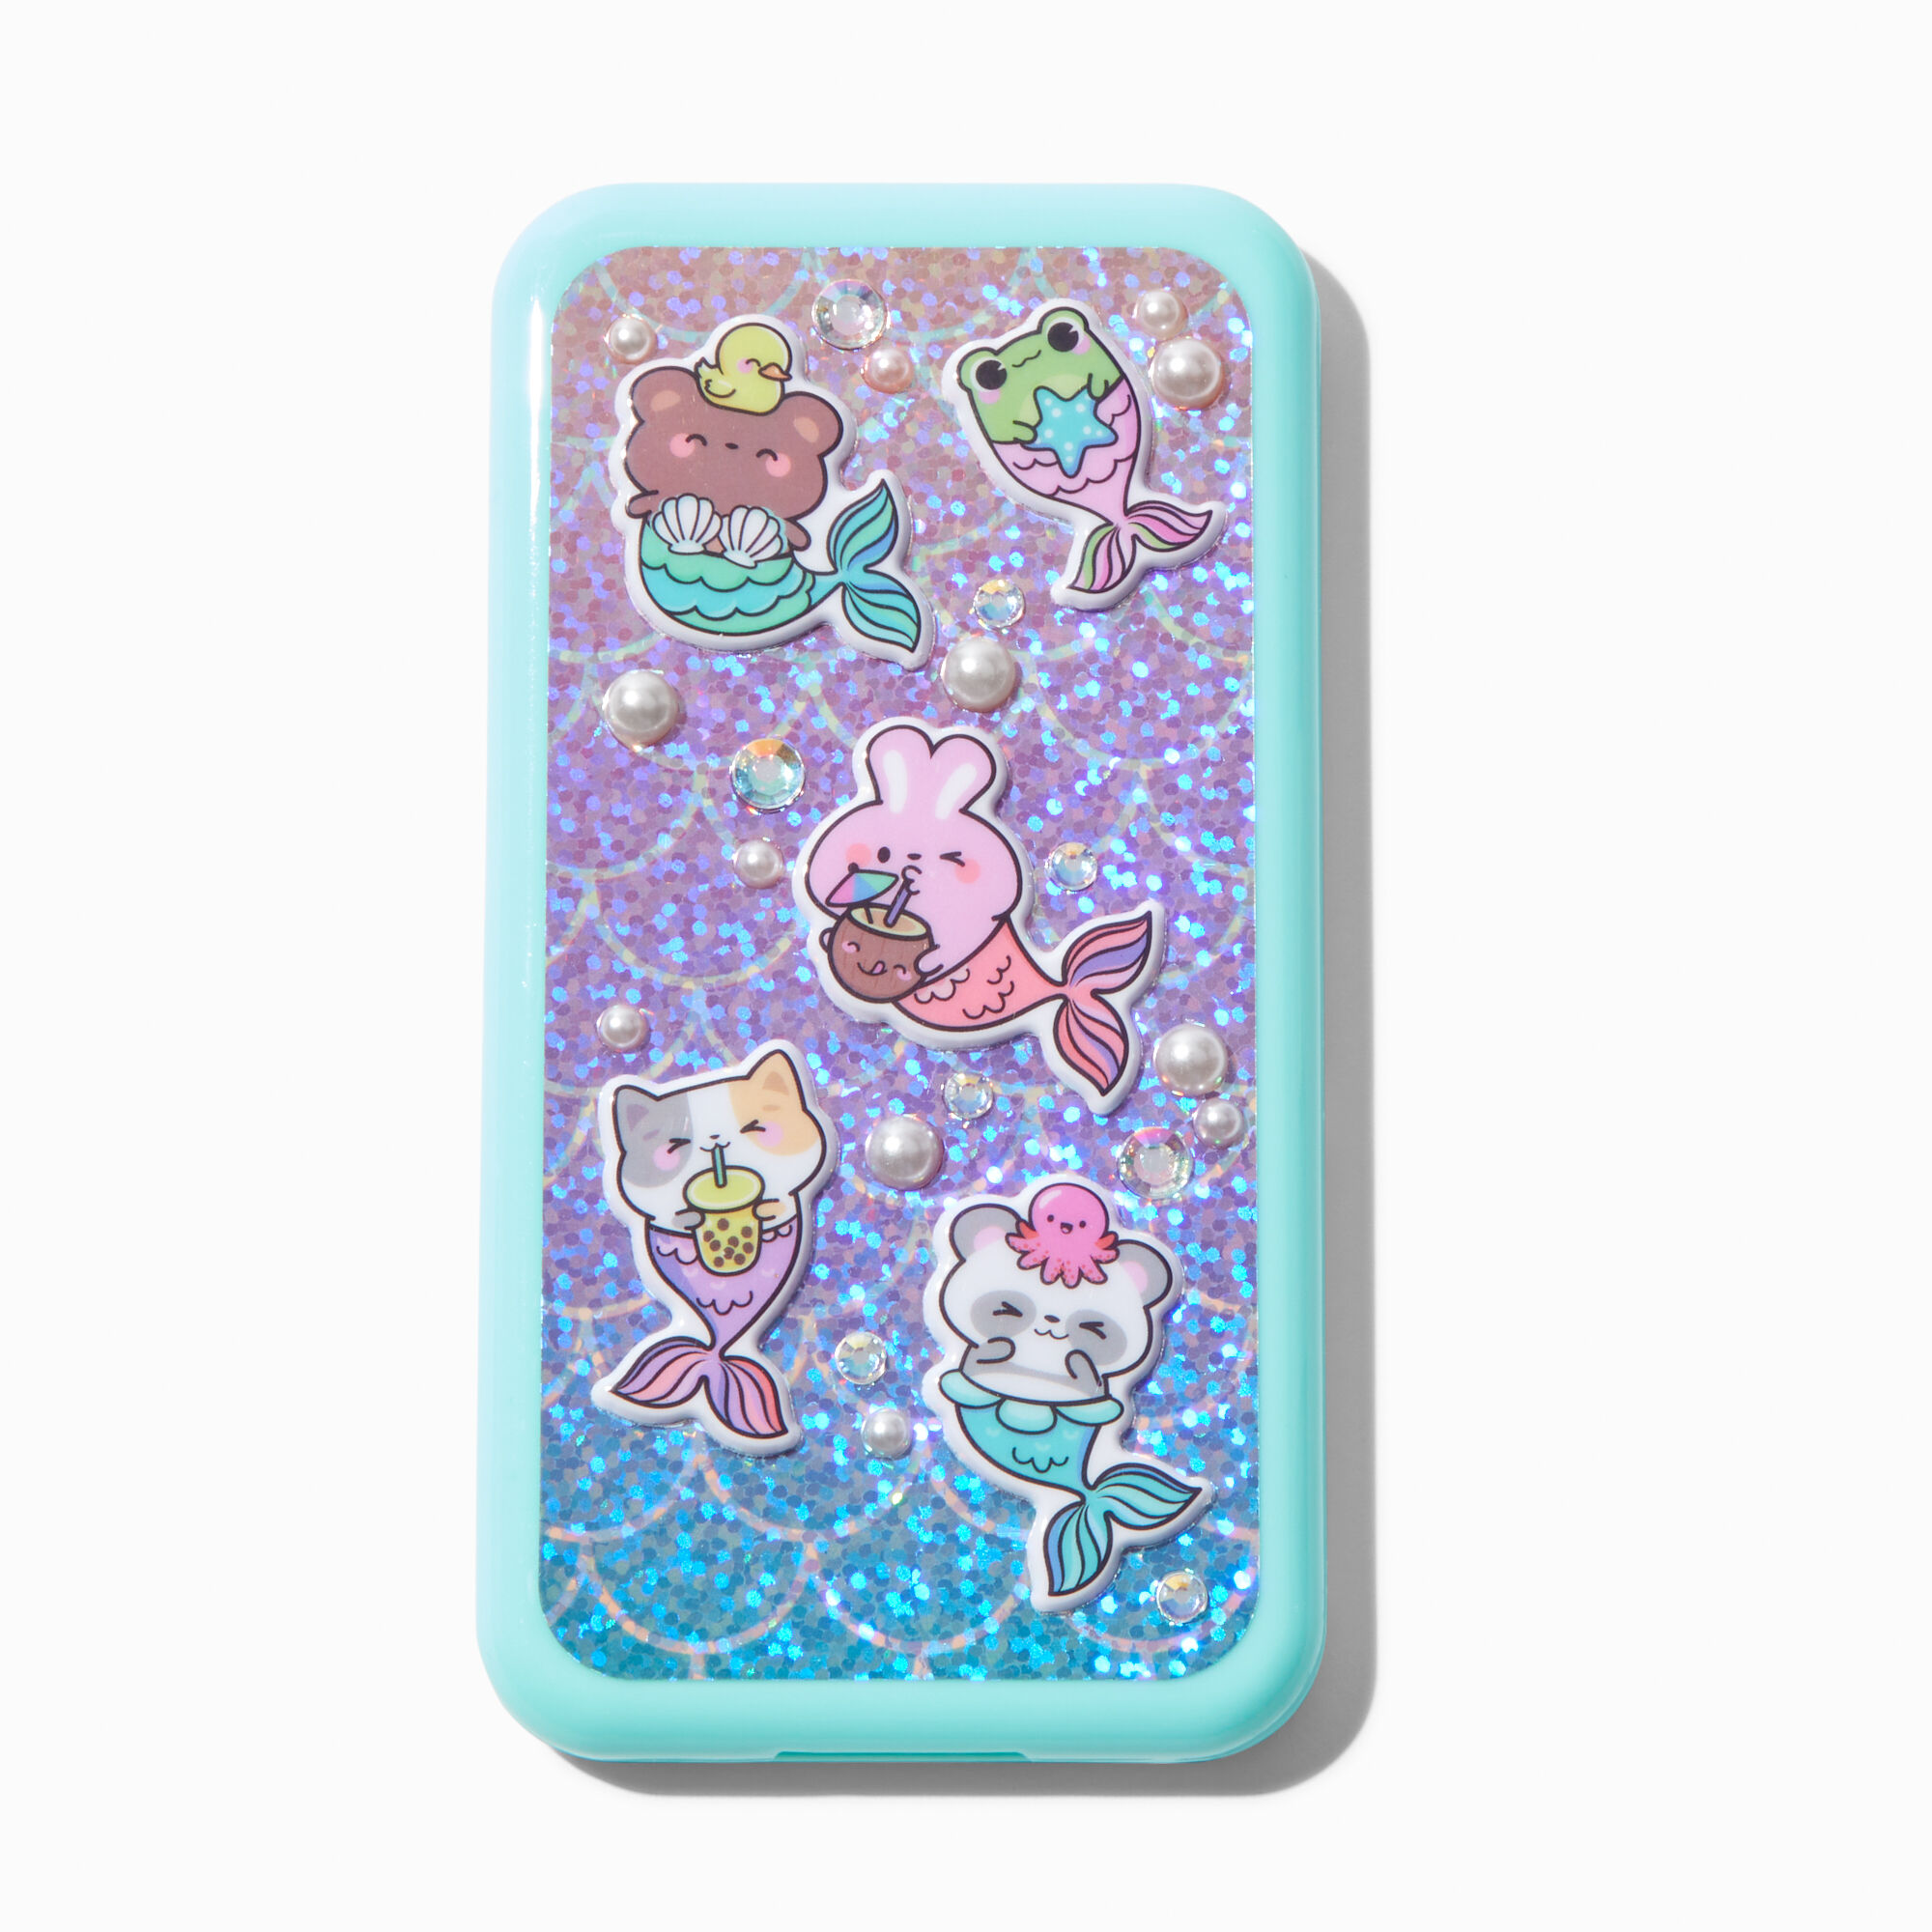 View Claires Mermaid Critter Bling Cellphone Makeup Palette information